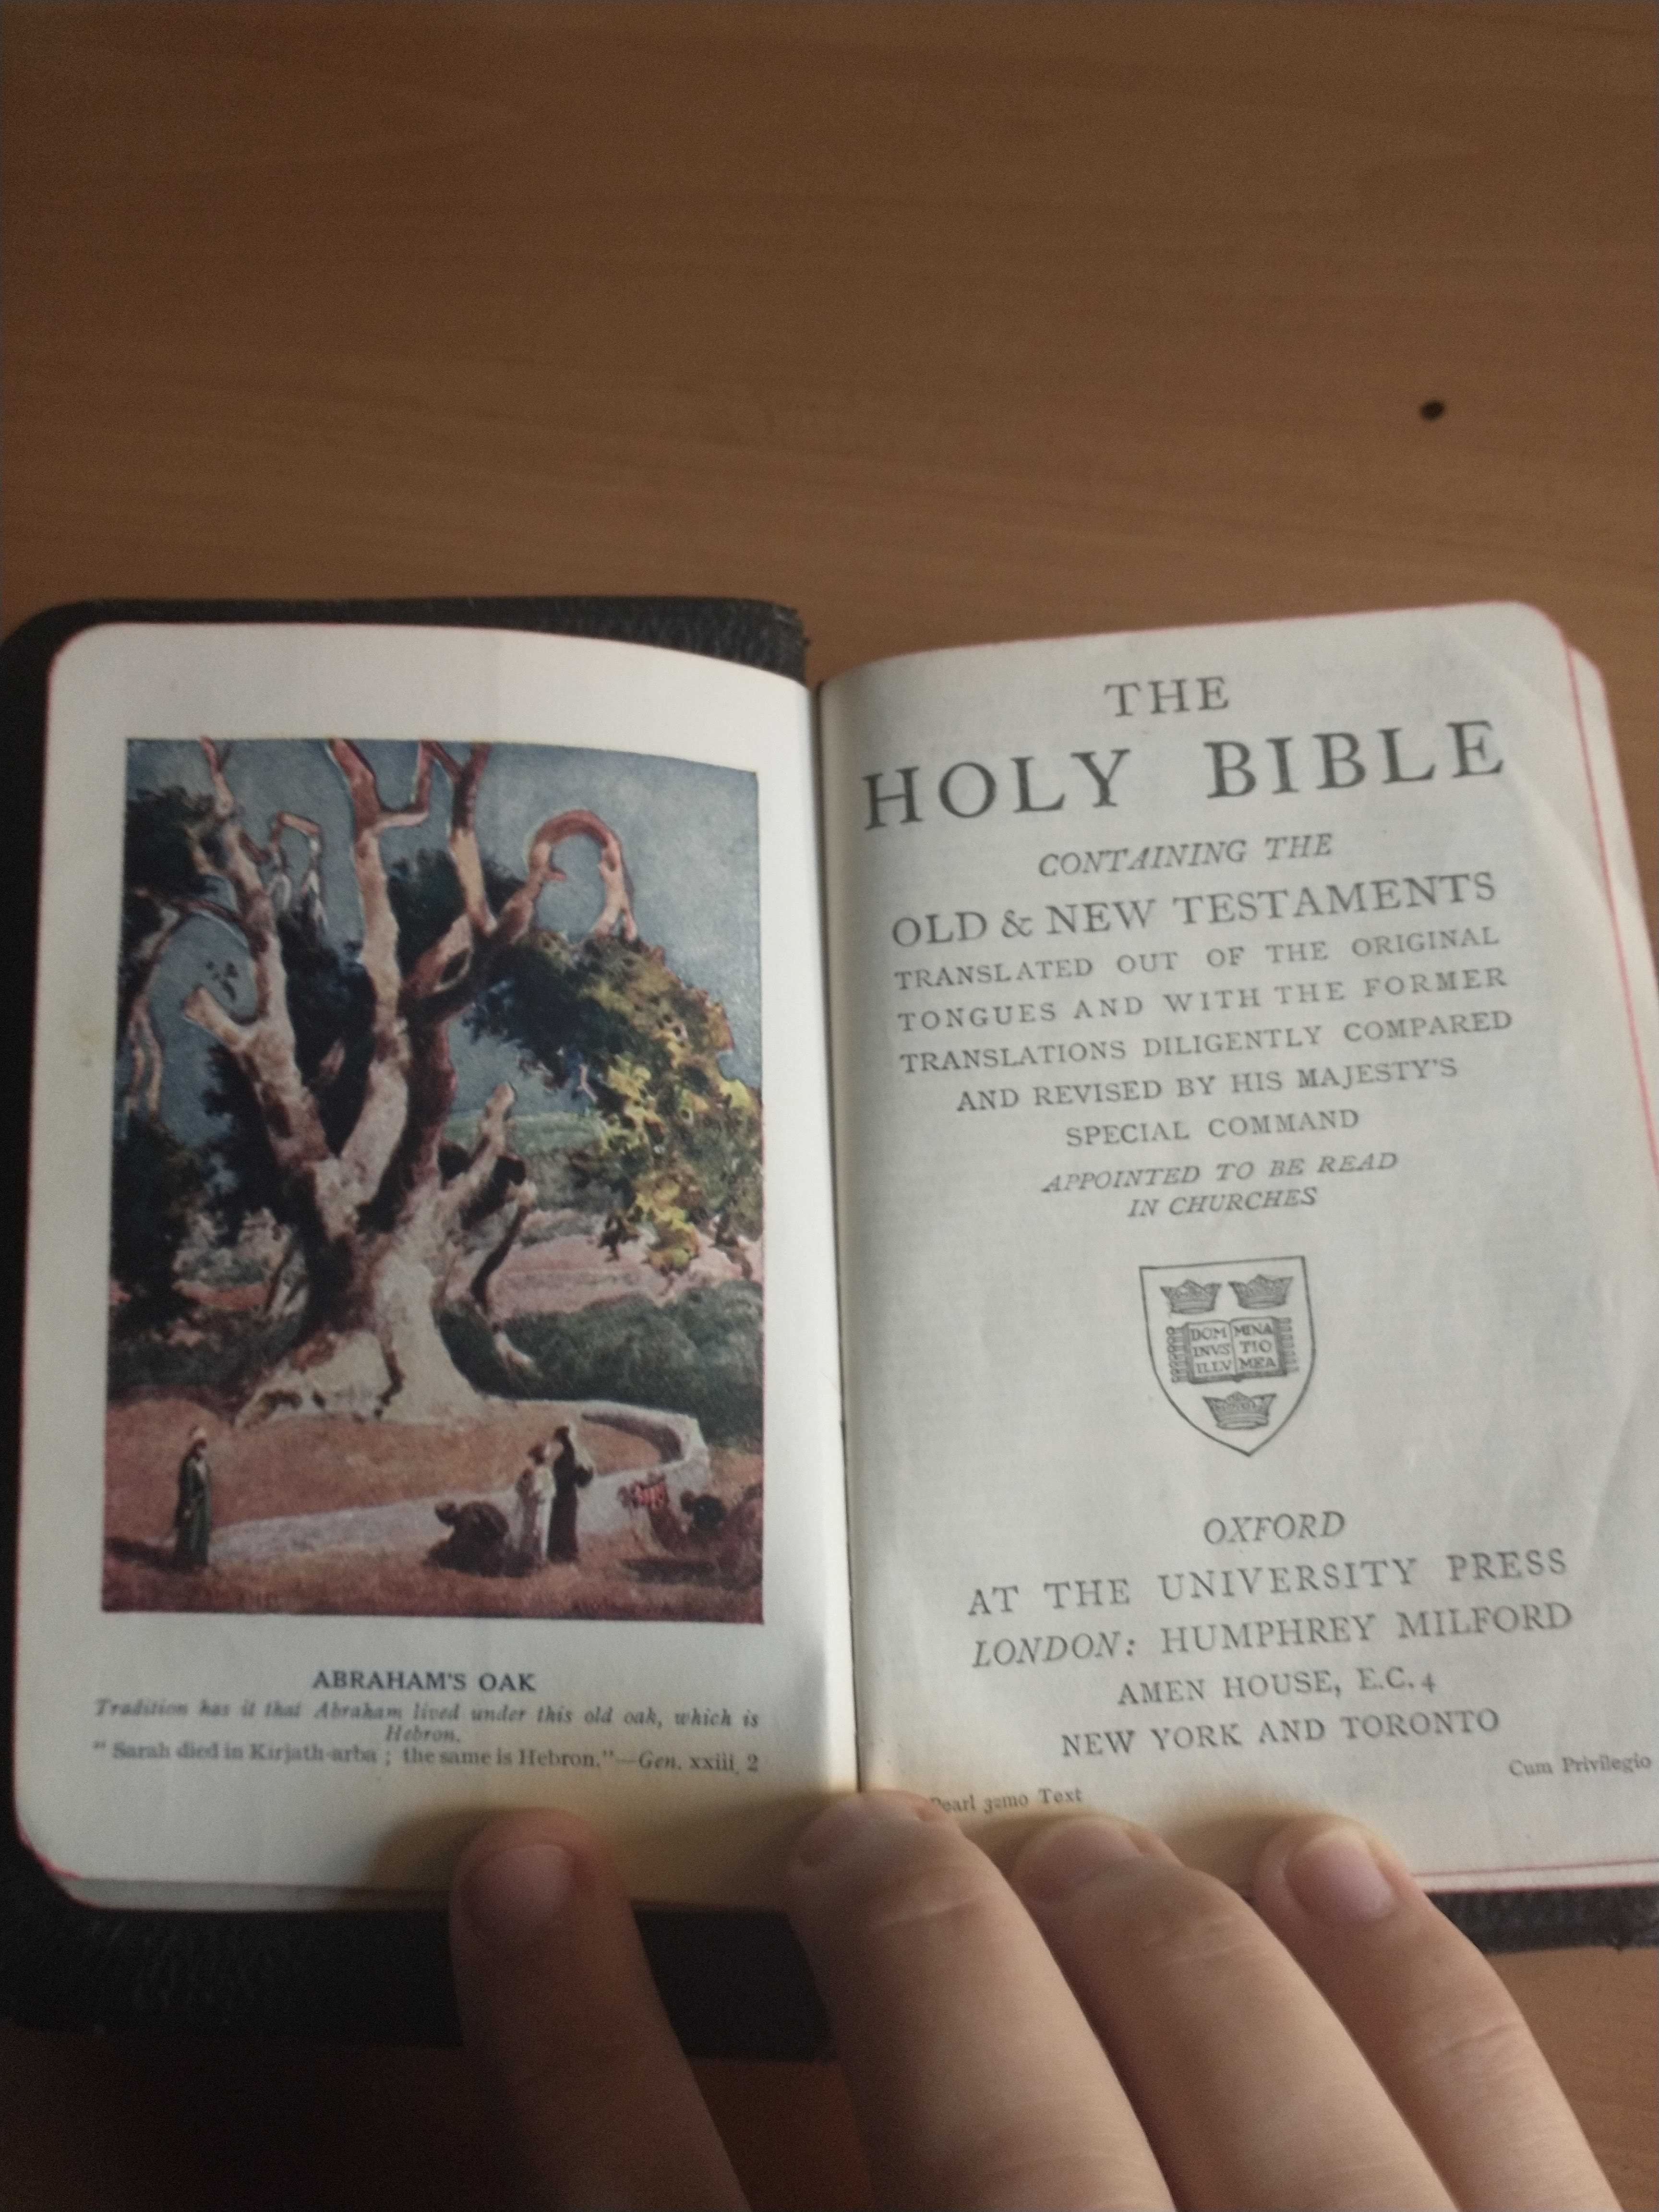 The Bible is open to its first page. On the left page is a color illustration of "Abraham's Oak". The colors are bright, almost like watercolors. There are figures gathered around the bottom of the tree. On the right page is an old-looking copyright page that reads in all-caps, "The Holy Bible, Containing The Old & New Testaments, Translated Out Of The Original Tongues And With The Former Translations Diligently Compared And Revised By His Majesty' Special Command, (in italics)Appointed To Be Read In Churches". The logo for Oxford University is printed. Then, the text continues, "Oxford, At The University Press; London: Humphrey Milford, Amen House, E.C.4, New York And Toronto".